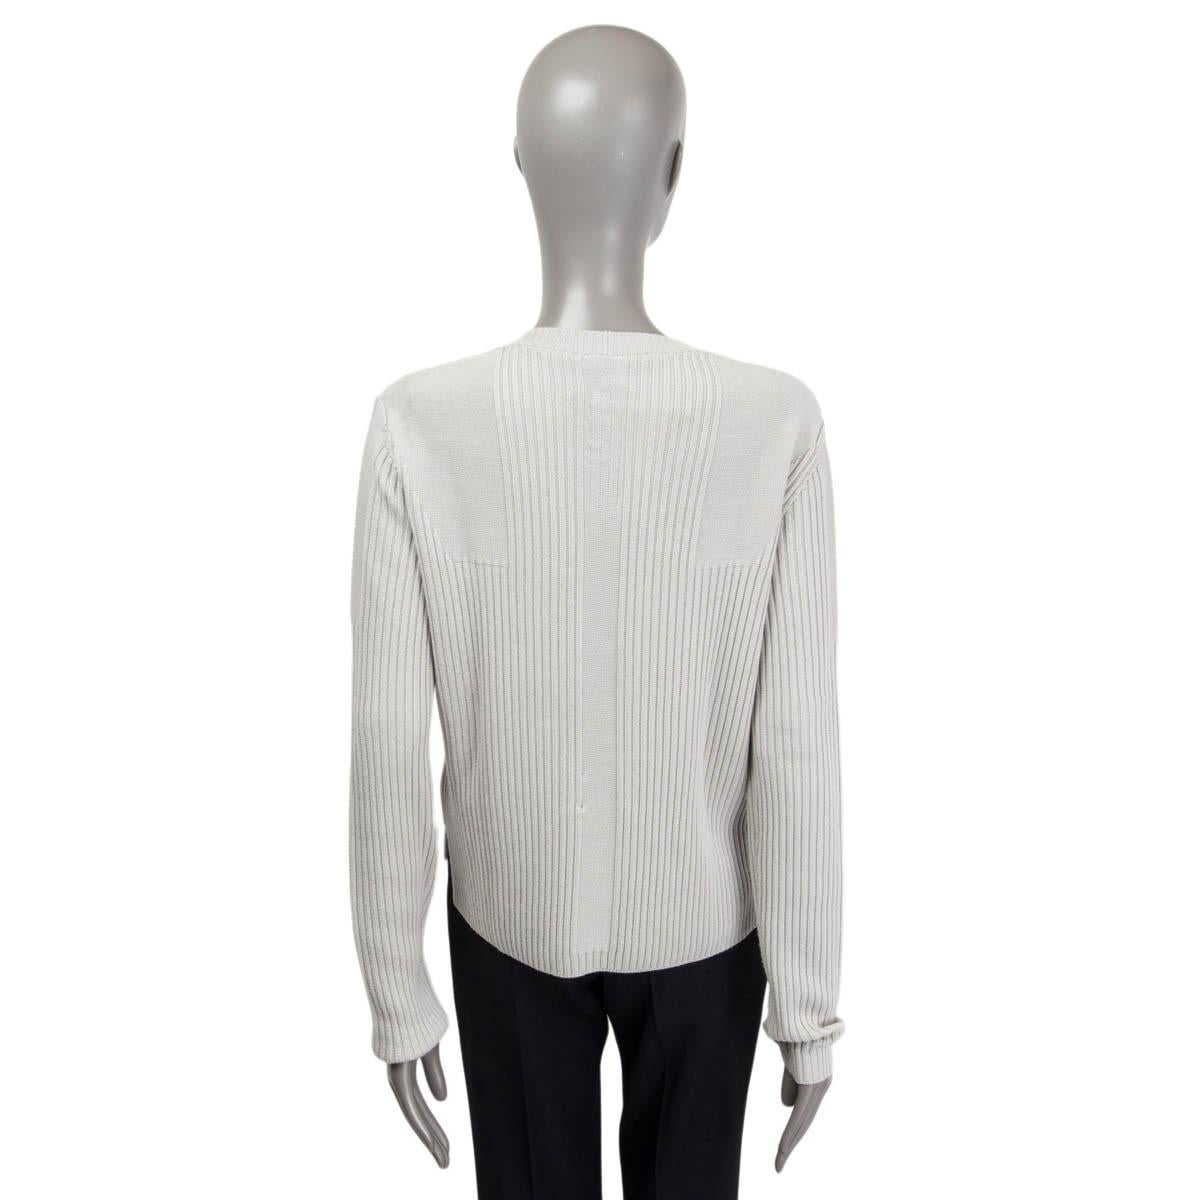 100% authentic Rick Owens Spring/Summer 2021 'Fisherman' long sleeve rib knit sweater in oyster new wool (100%). Features slits on the sides. Unlined. Has been worn once and is in virtually new condition.

Measurements
Tag Size	S
Size	S
Shoulder